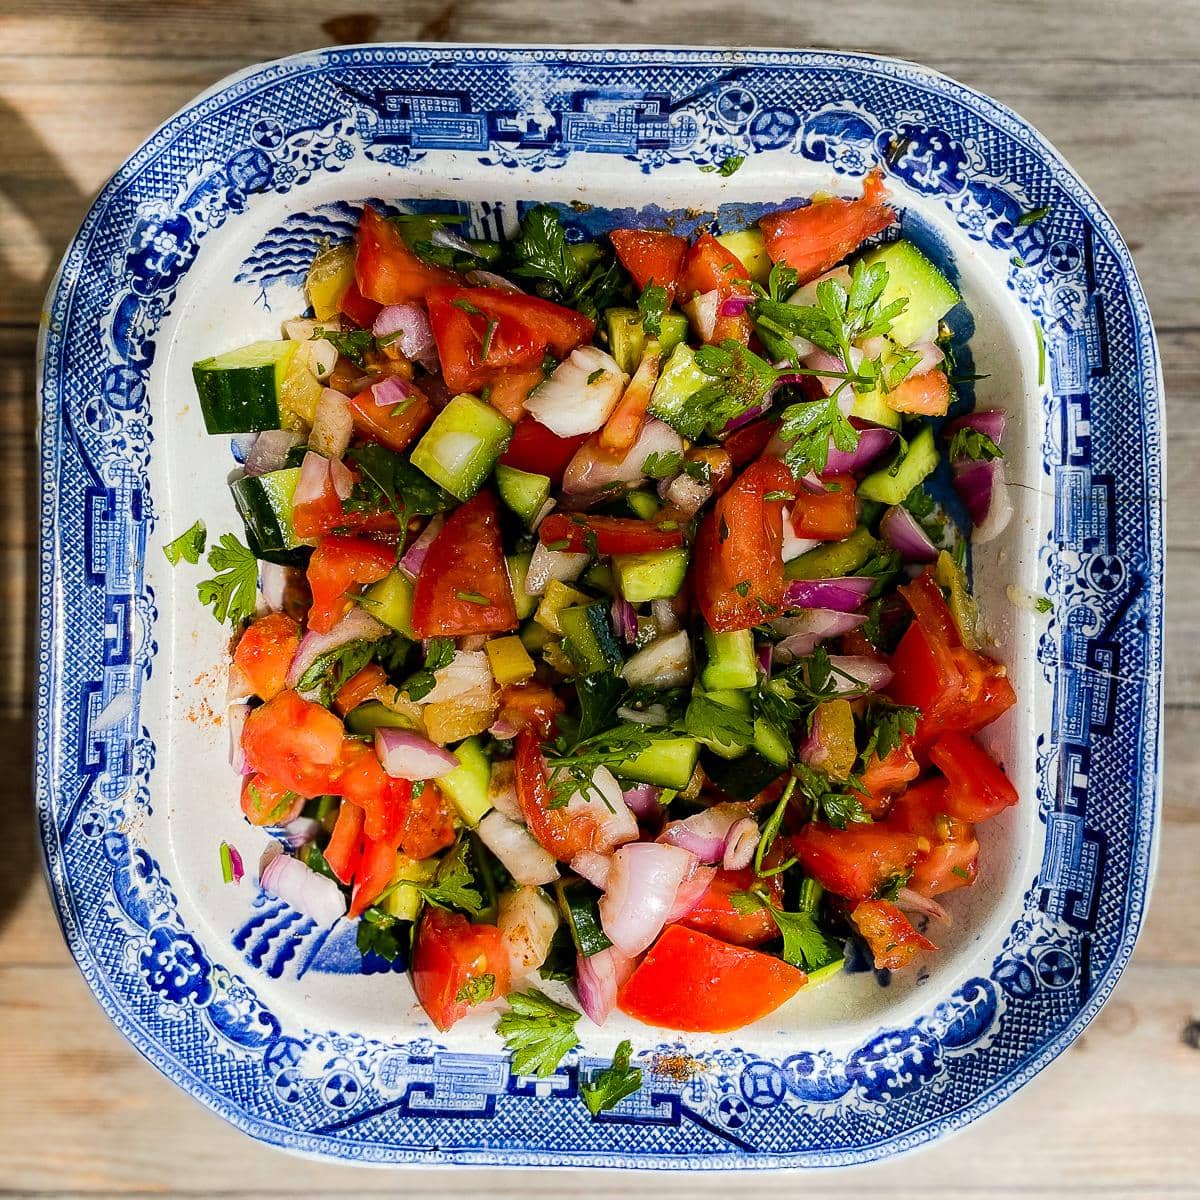 Indian salad served in an antique blue and white china bowl.